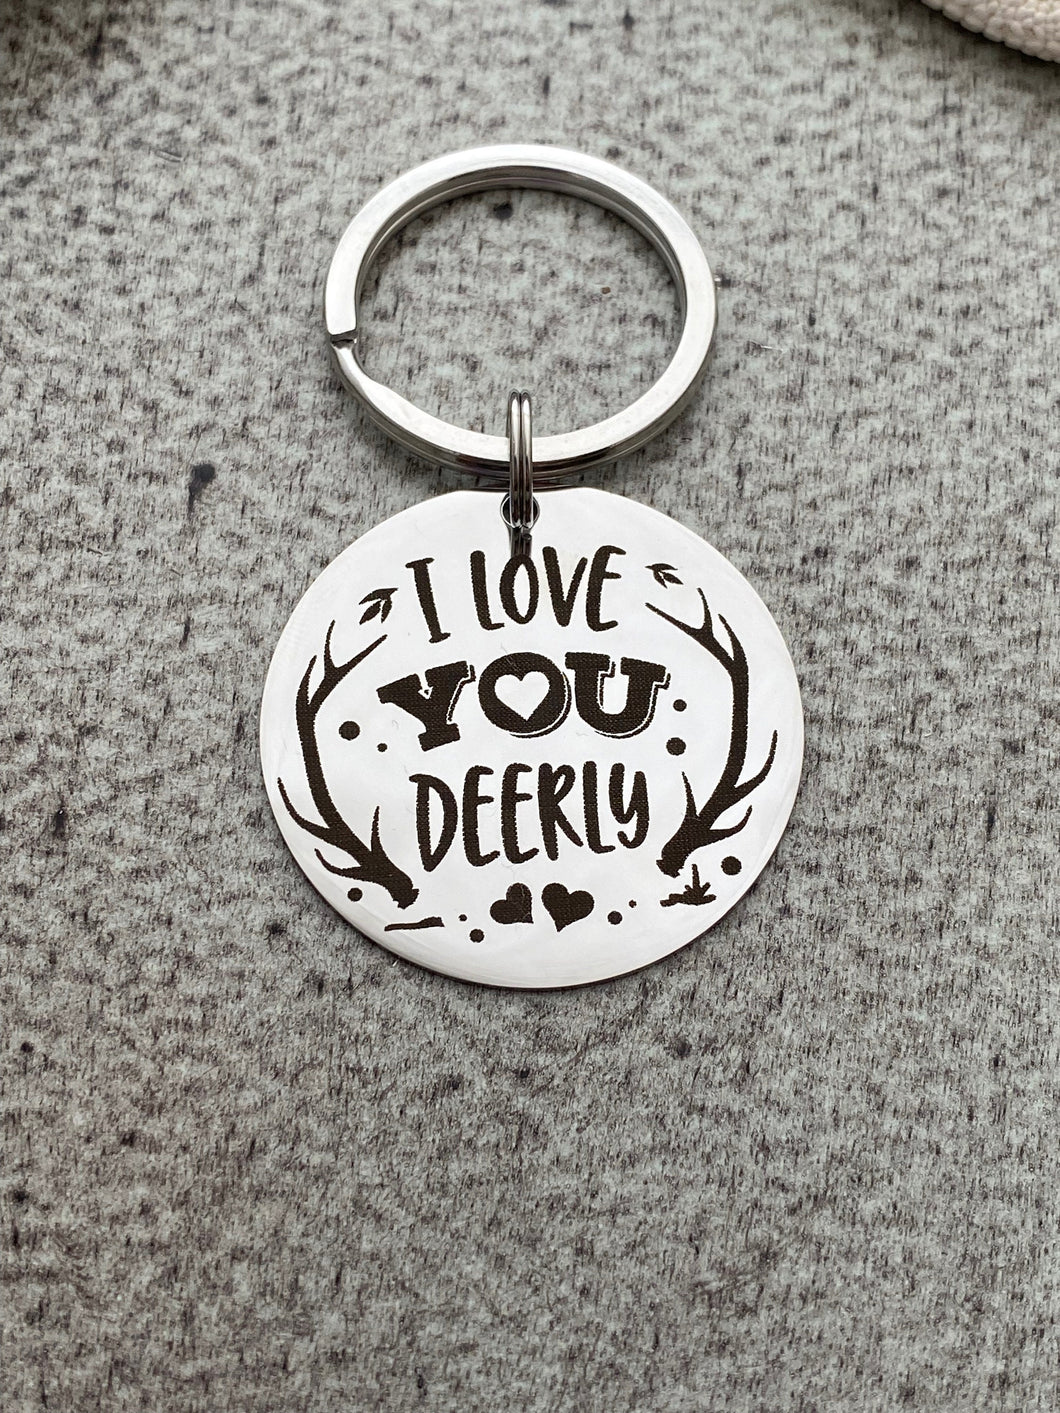 I love you deerly deer keychain - stainless steel engraved Key Chain -  love you dearly - gift for friend - pun keychain